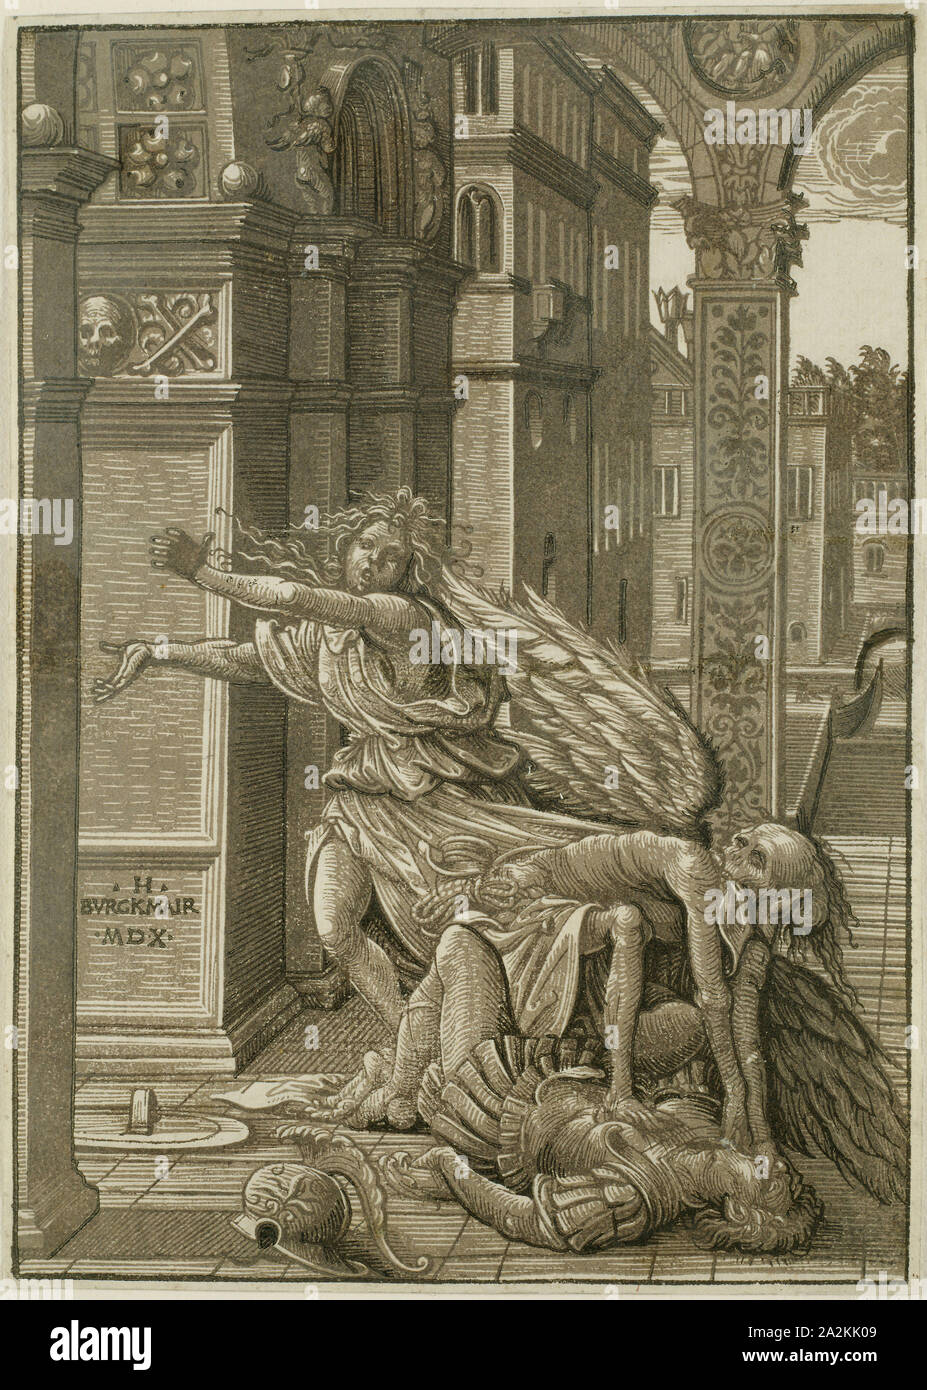 Lovers Surprised by Death, 1510, Hans Burgkmair the Elder, German, 1473-1531, Germany, Chiaroscuro woodcut in 3 shades of brown on ivory laid paper, 217 x 157 mm Stock Photo